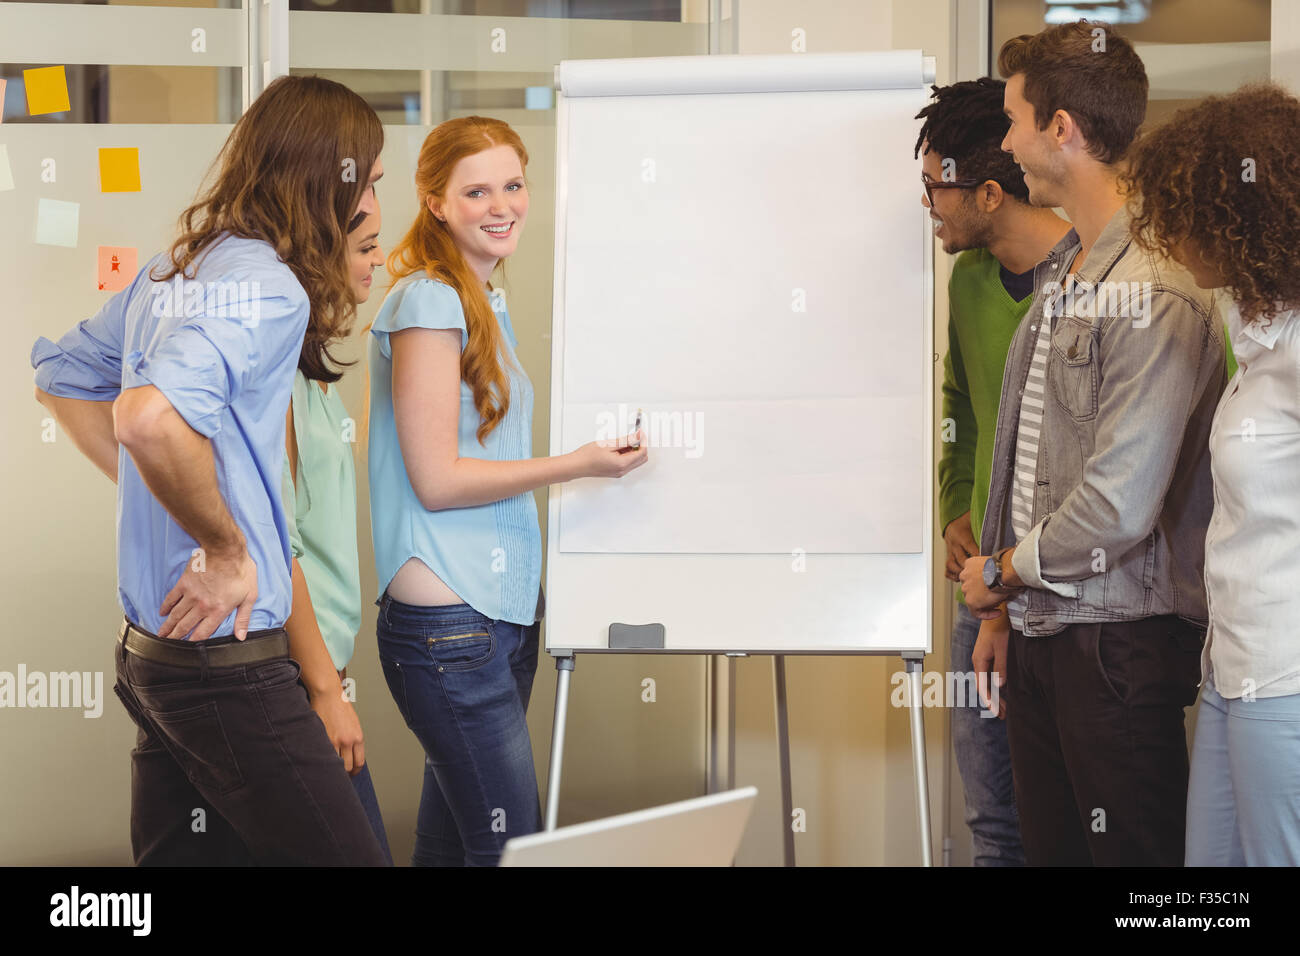 Smiling businesswoman discussing with colleagues Stock Photo